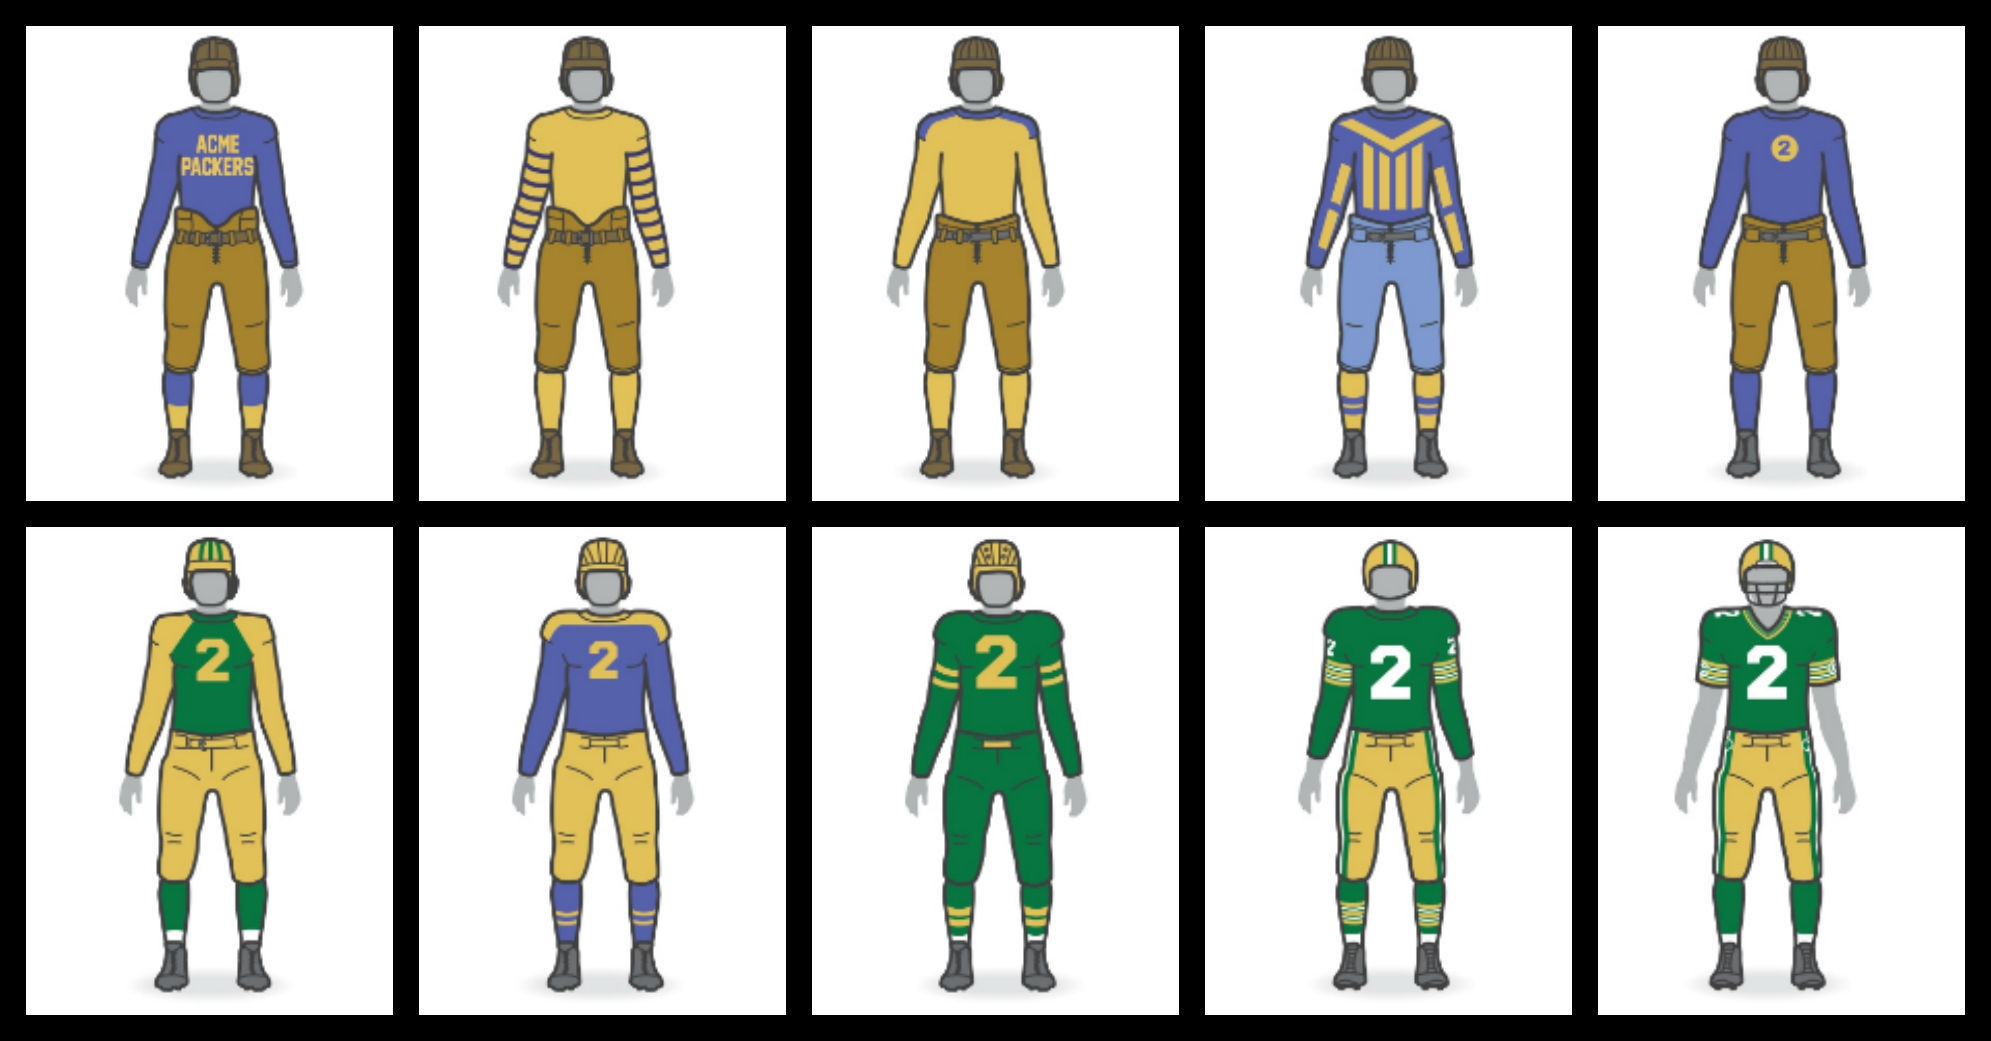 packers old uniforms